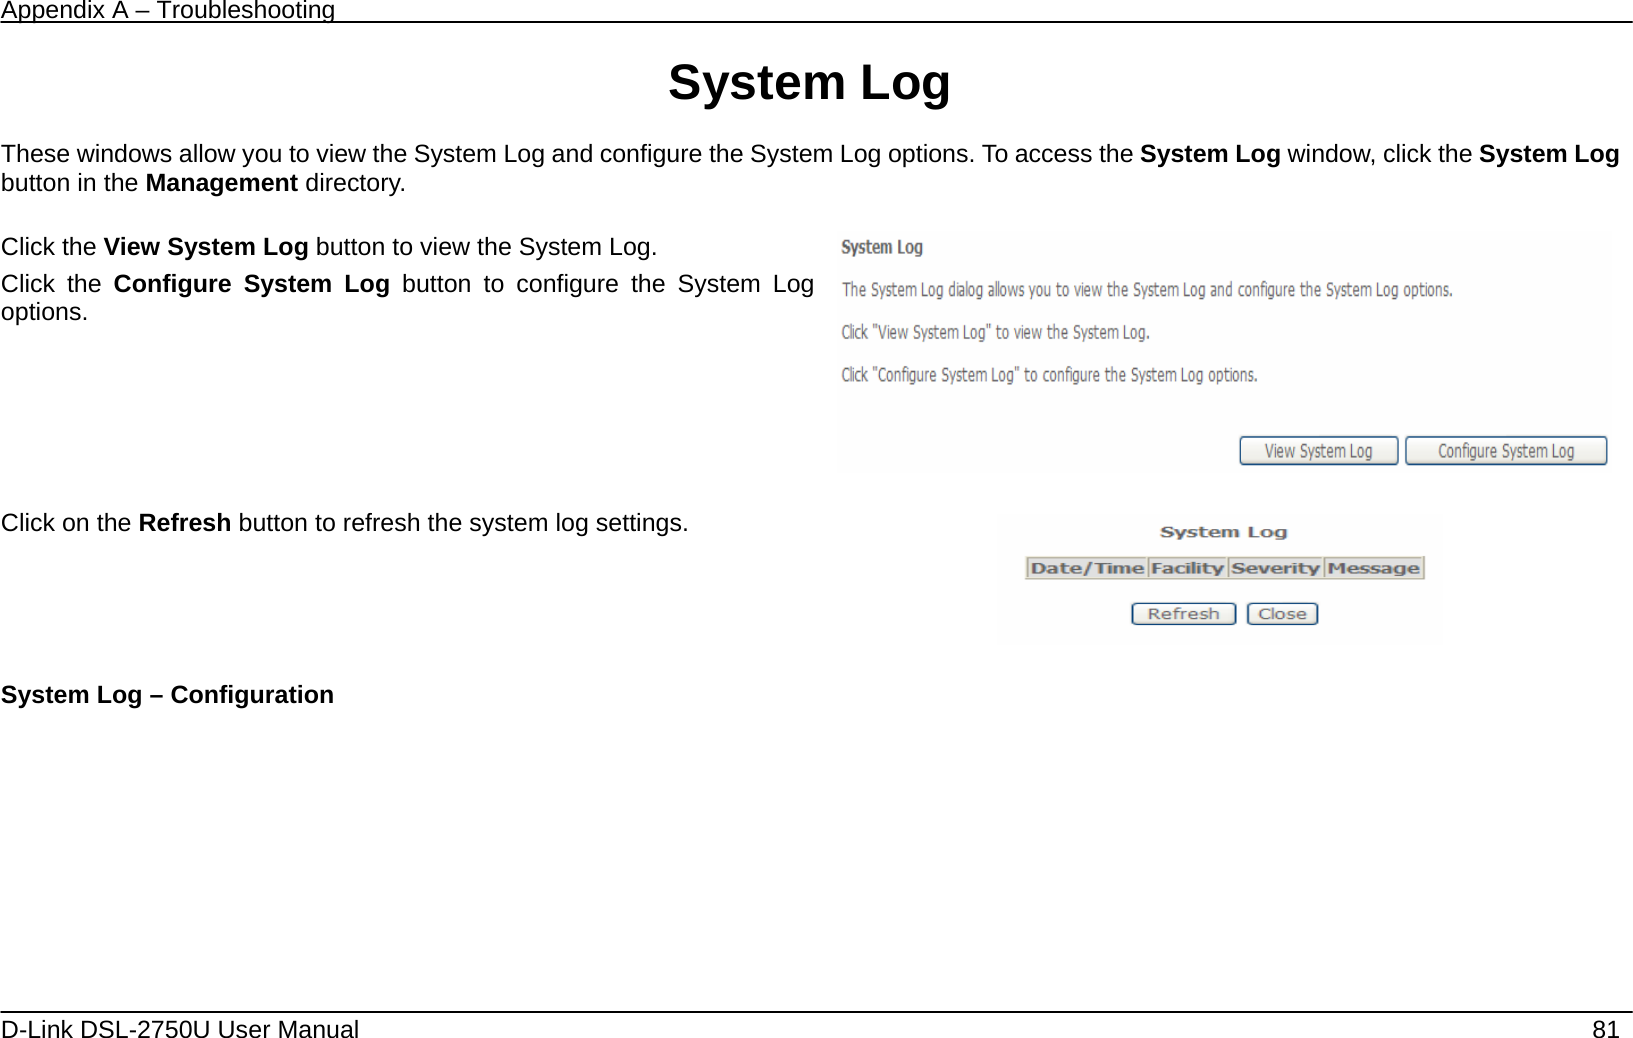 Appendix A – Troubleshooting   D-Link DSL-2750U User Manual    81 System Log  These windows allow you to view the System Log and configure the System Log options. To access the System Log window, click the System Log button in the Management directory.  Click the View System Log button to view the System Log. Click the Configure System Log button to configure the System Log options.     Click on the Refresh button to refresh the system log settings.   System Log – Configuration 